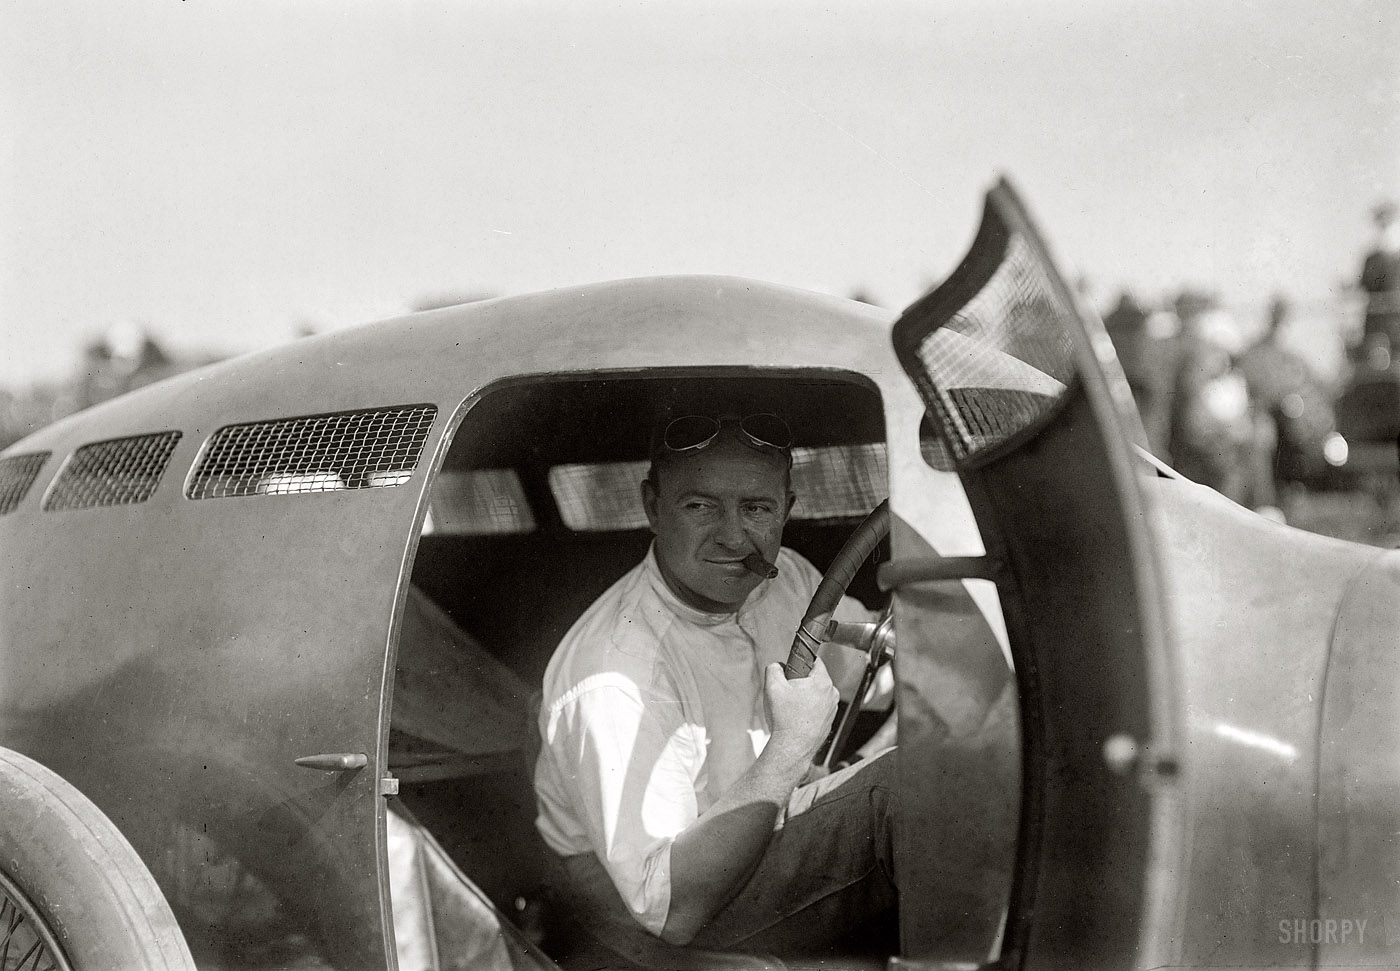 August 18, 1917. Racecar driver Barney Oldfield in the cockpit of his Golden Submarine at the Sheepshead Bay "speed carnival" in Brooklyn. 5x7 glass negative, George Grantham Bain Collection. View full size.